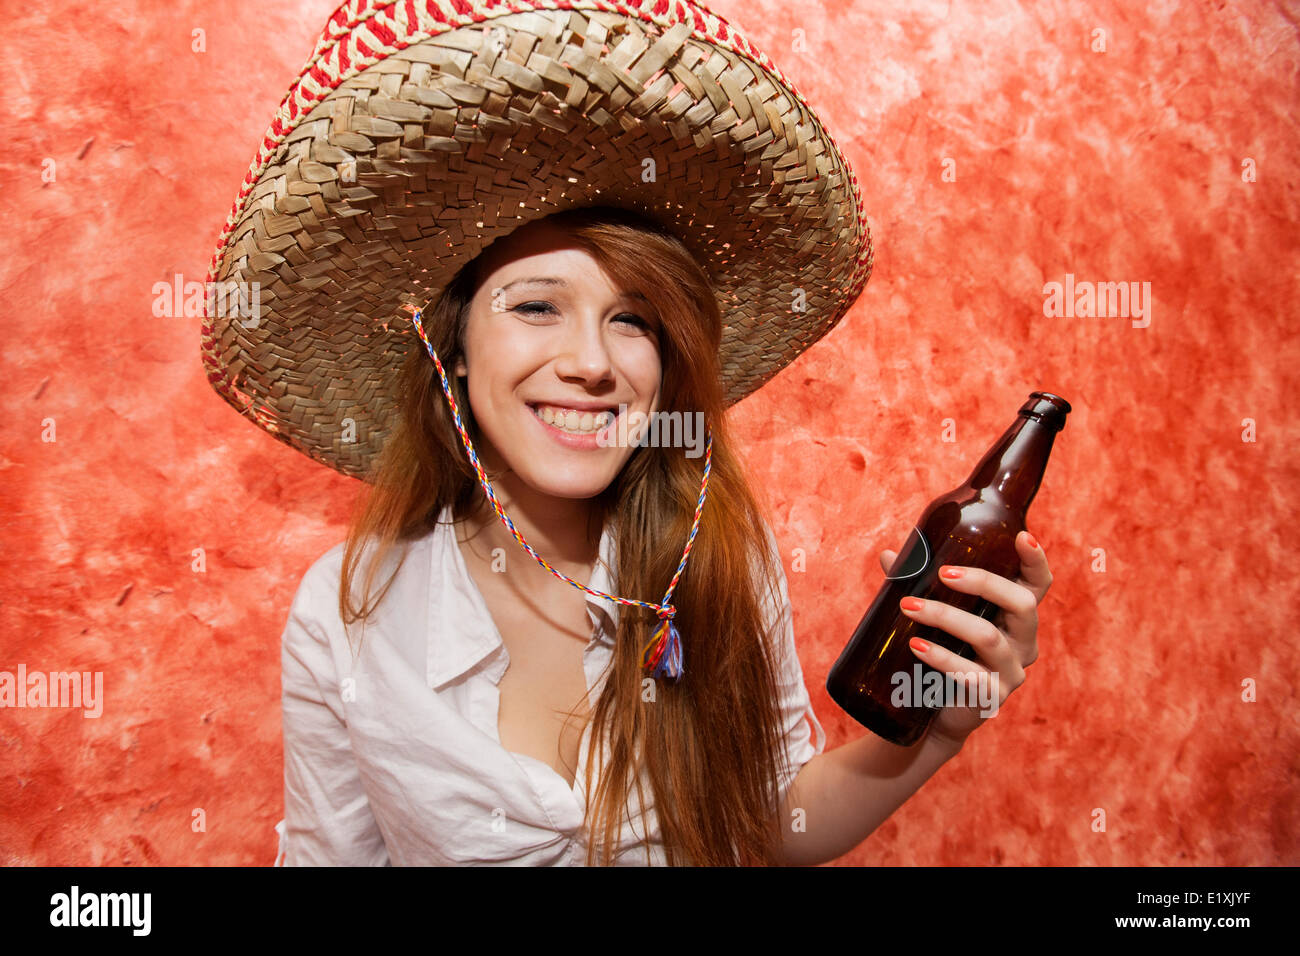 Happy woman in Mexican hat holding beer bottle in restaurant Stock Photo